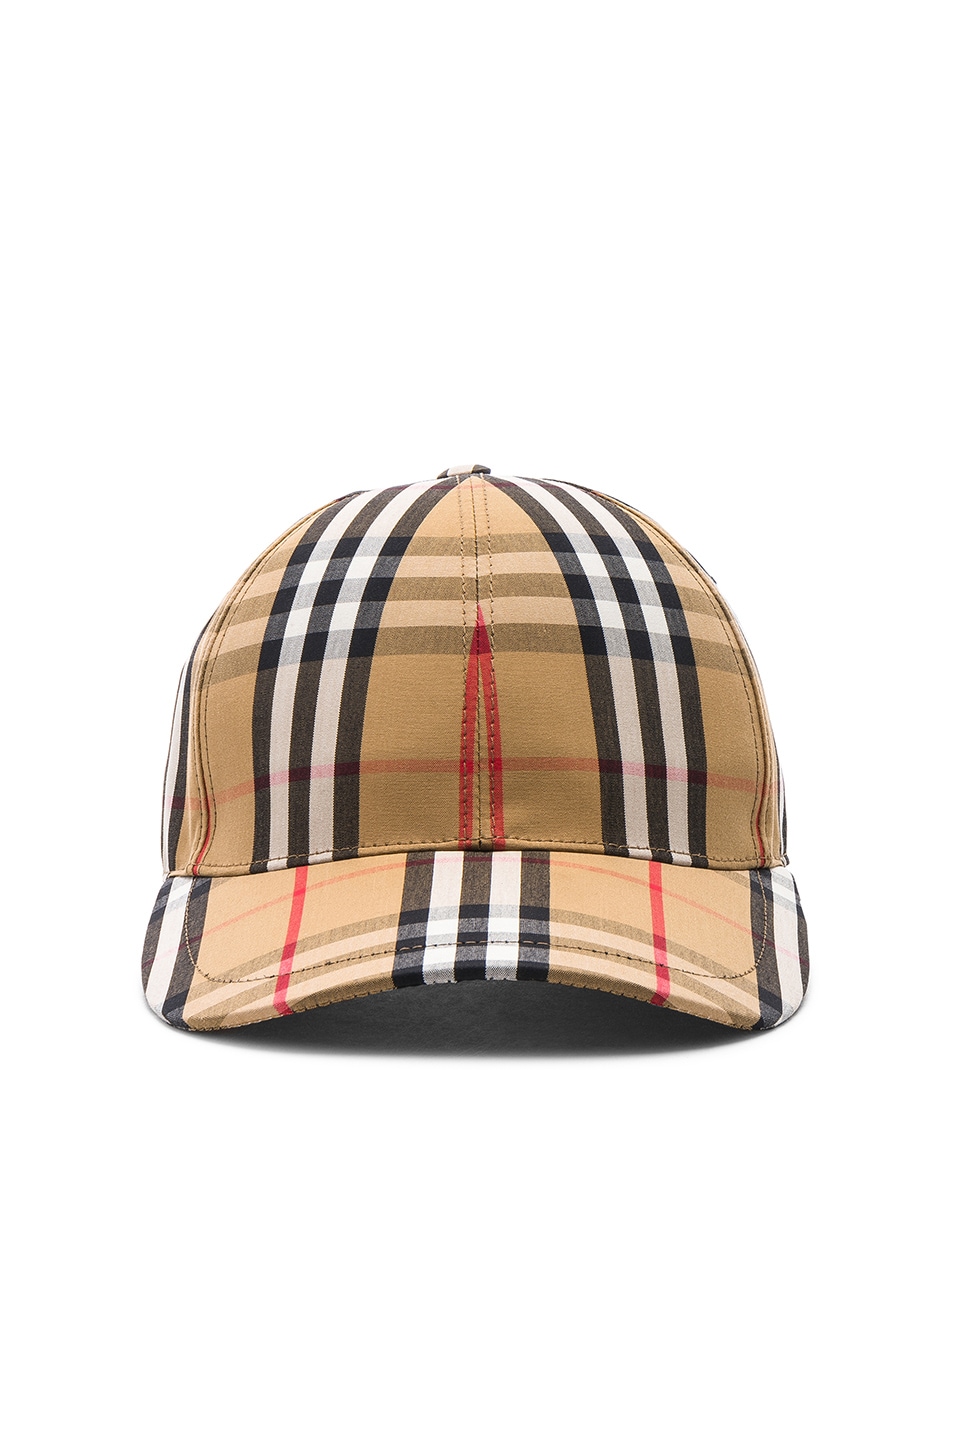 Burberry Vintage Check Baseball Cap in Antique Yellow Check | FWRD